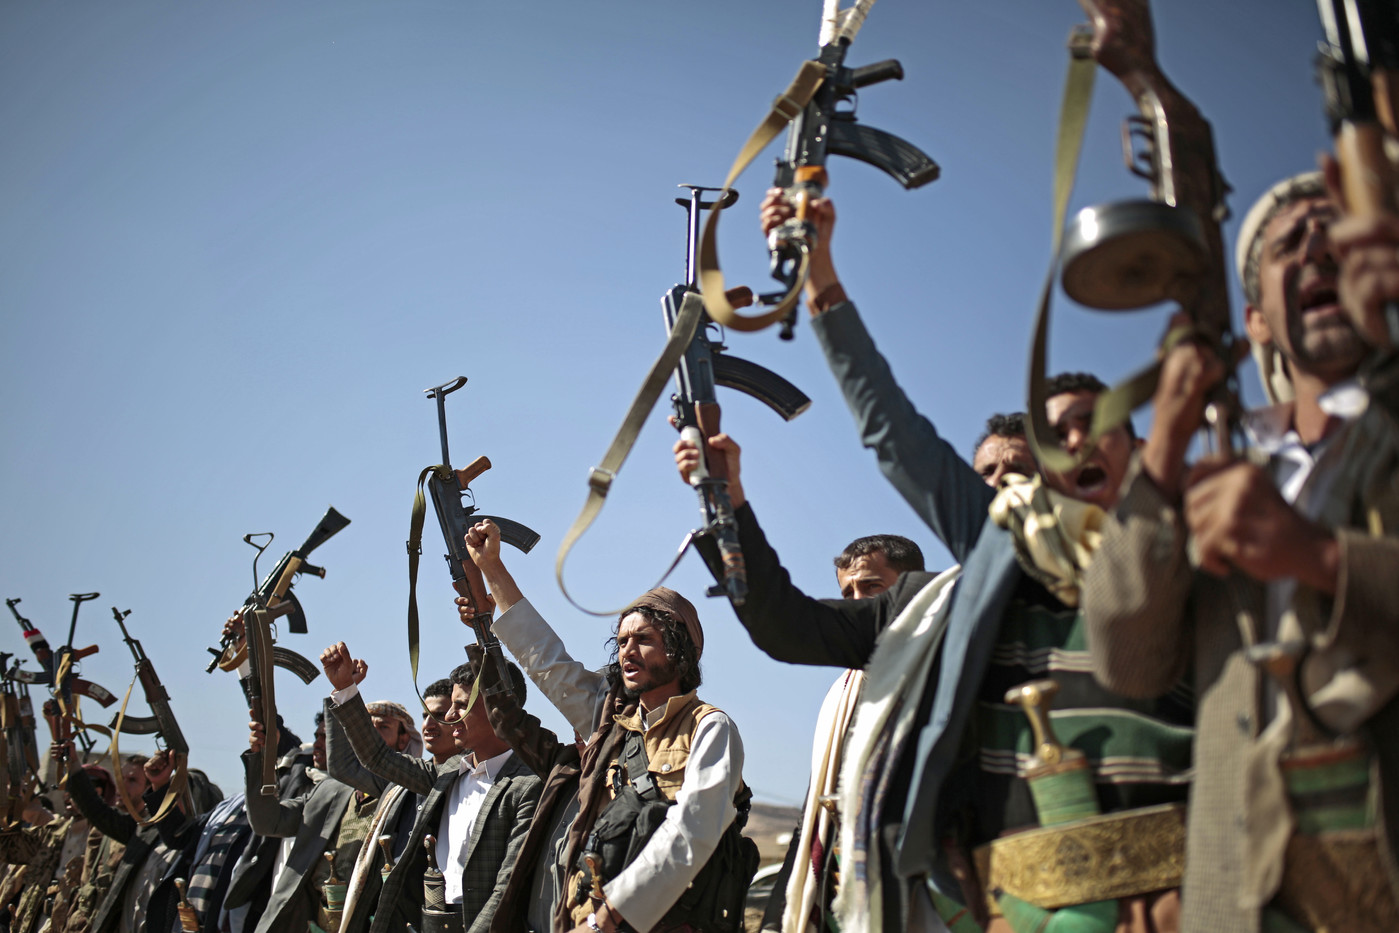 Tribesmen loyal to Houthi rebels hold up their weapons as they attend a gathering to show their support for the ongoing peace talks being held in Sweden, in Sanaa, Yemen, Thursday, Dec. 13, 2018. (AP Photo/Hani Mohammed)